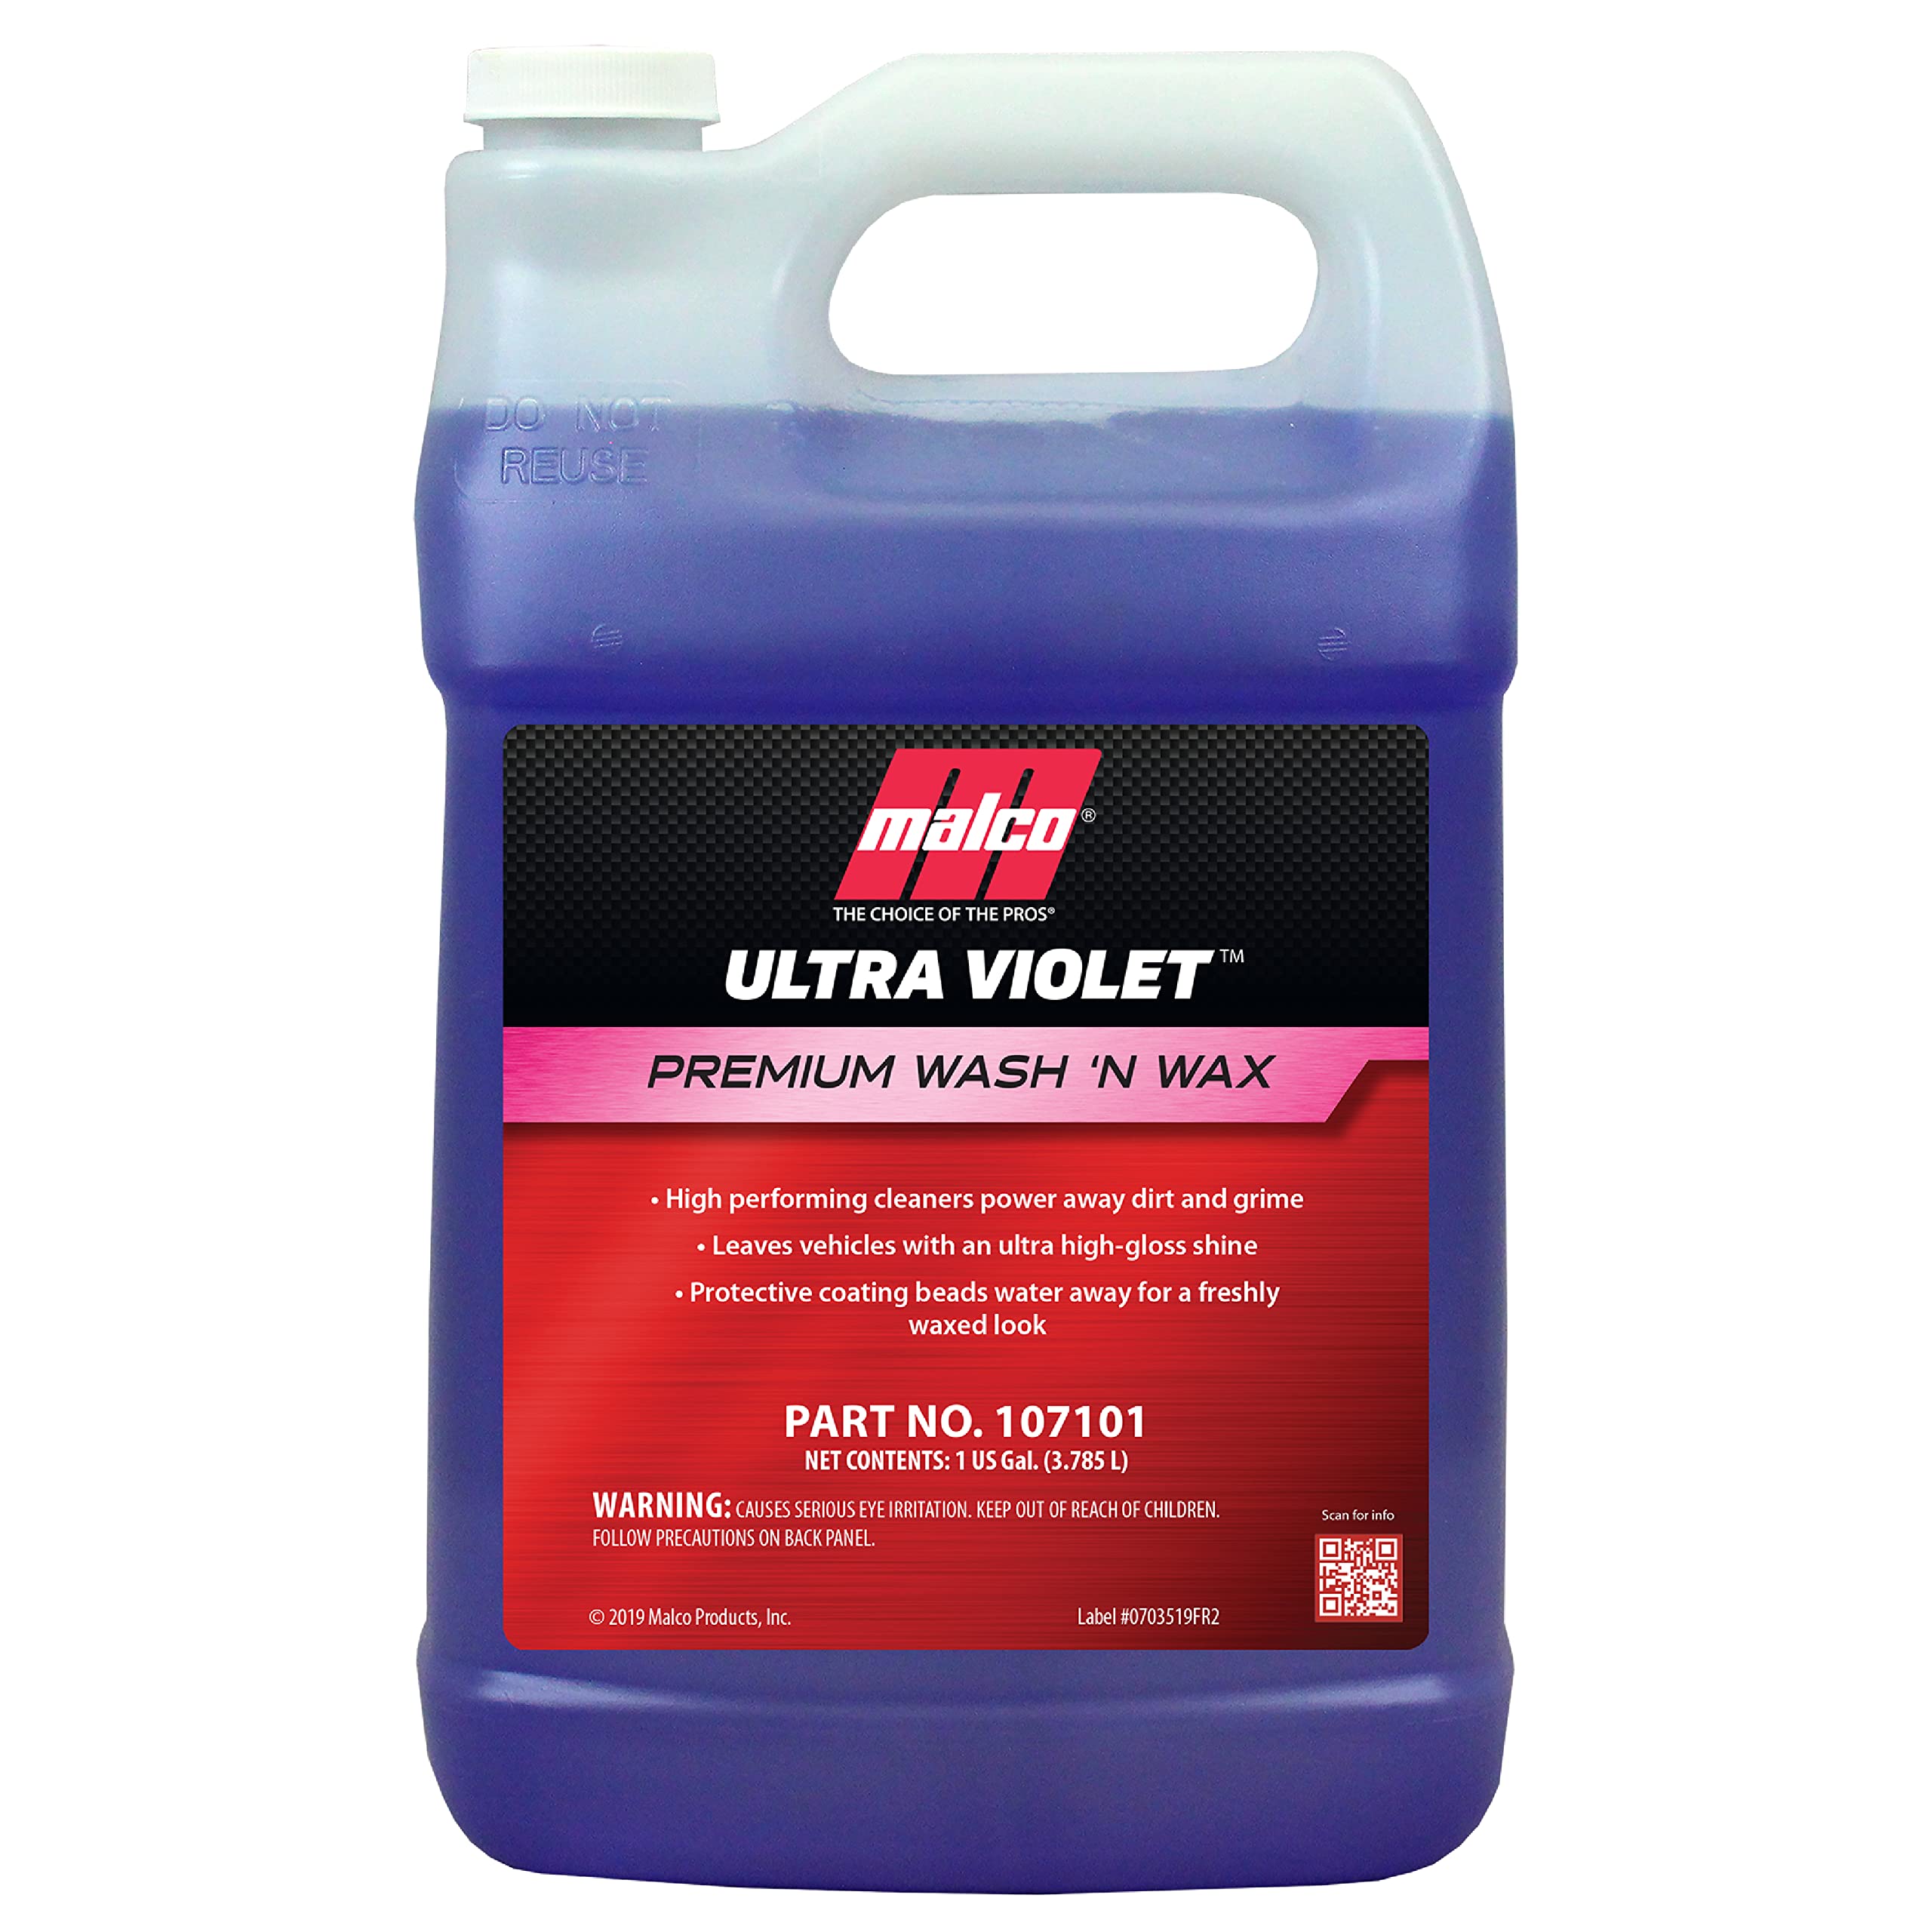 Malco Ultra Violet Premium Wash'n Wax - Best 2-In-1 Car Wash and Wax/Cleans and Provides A Durable, High-Gloss Shine in One Fast